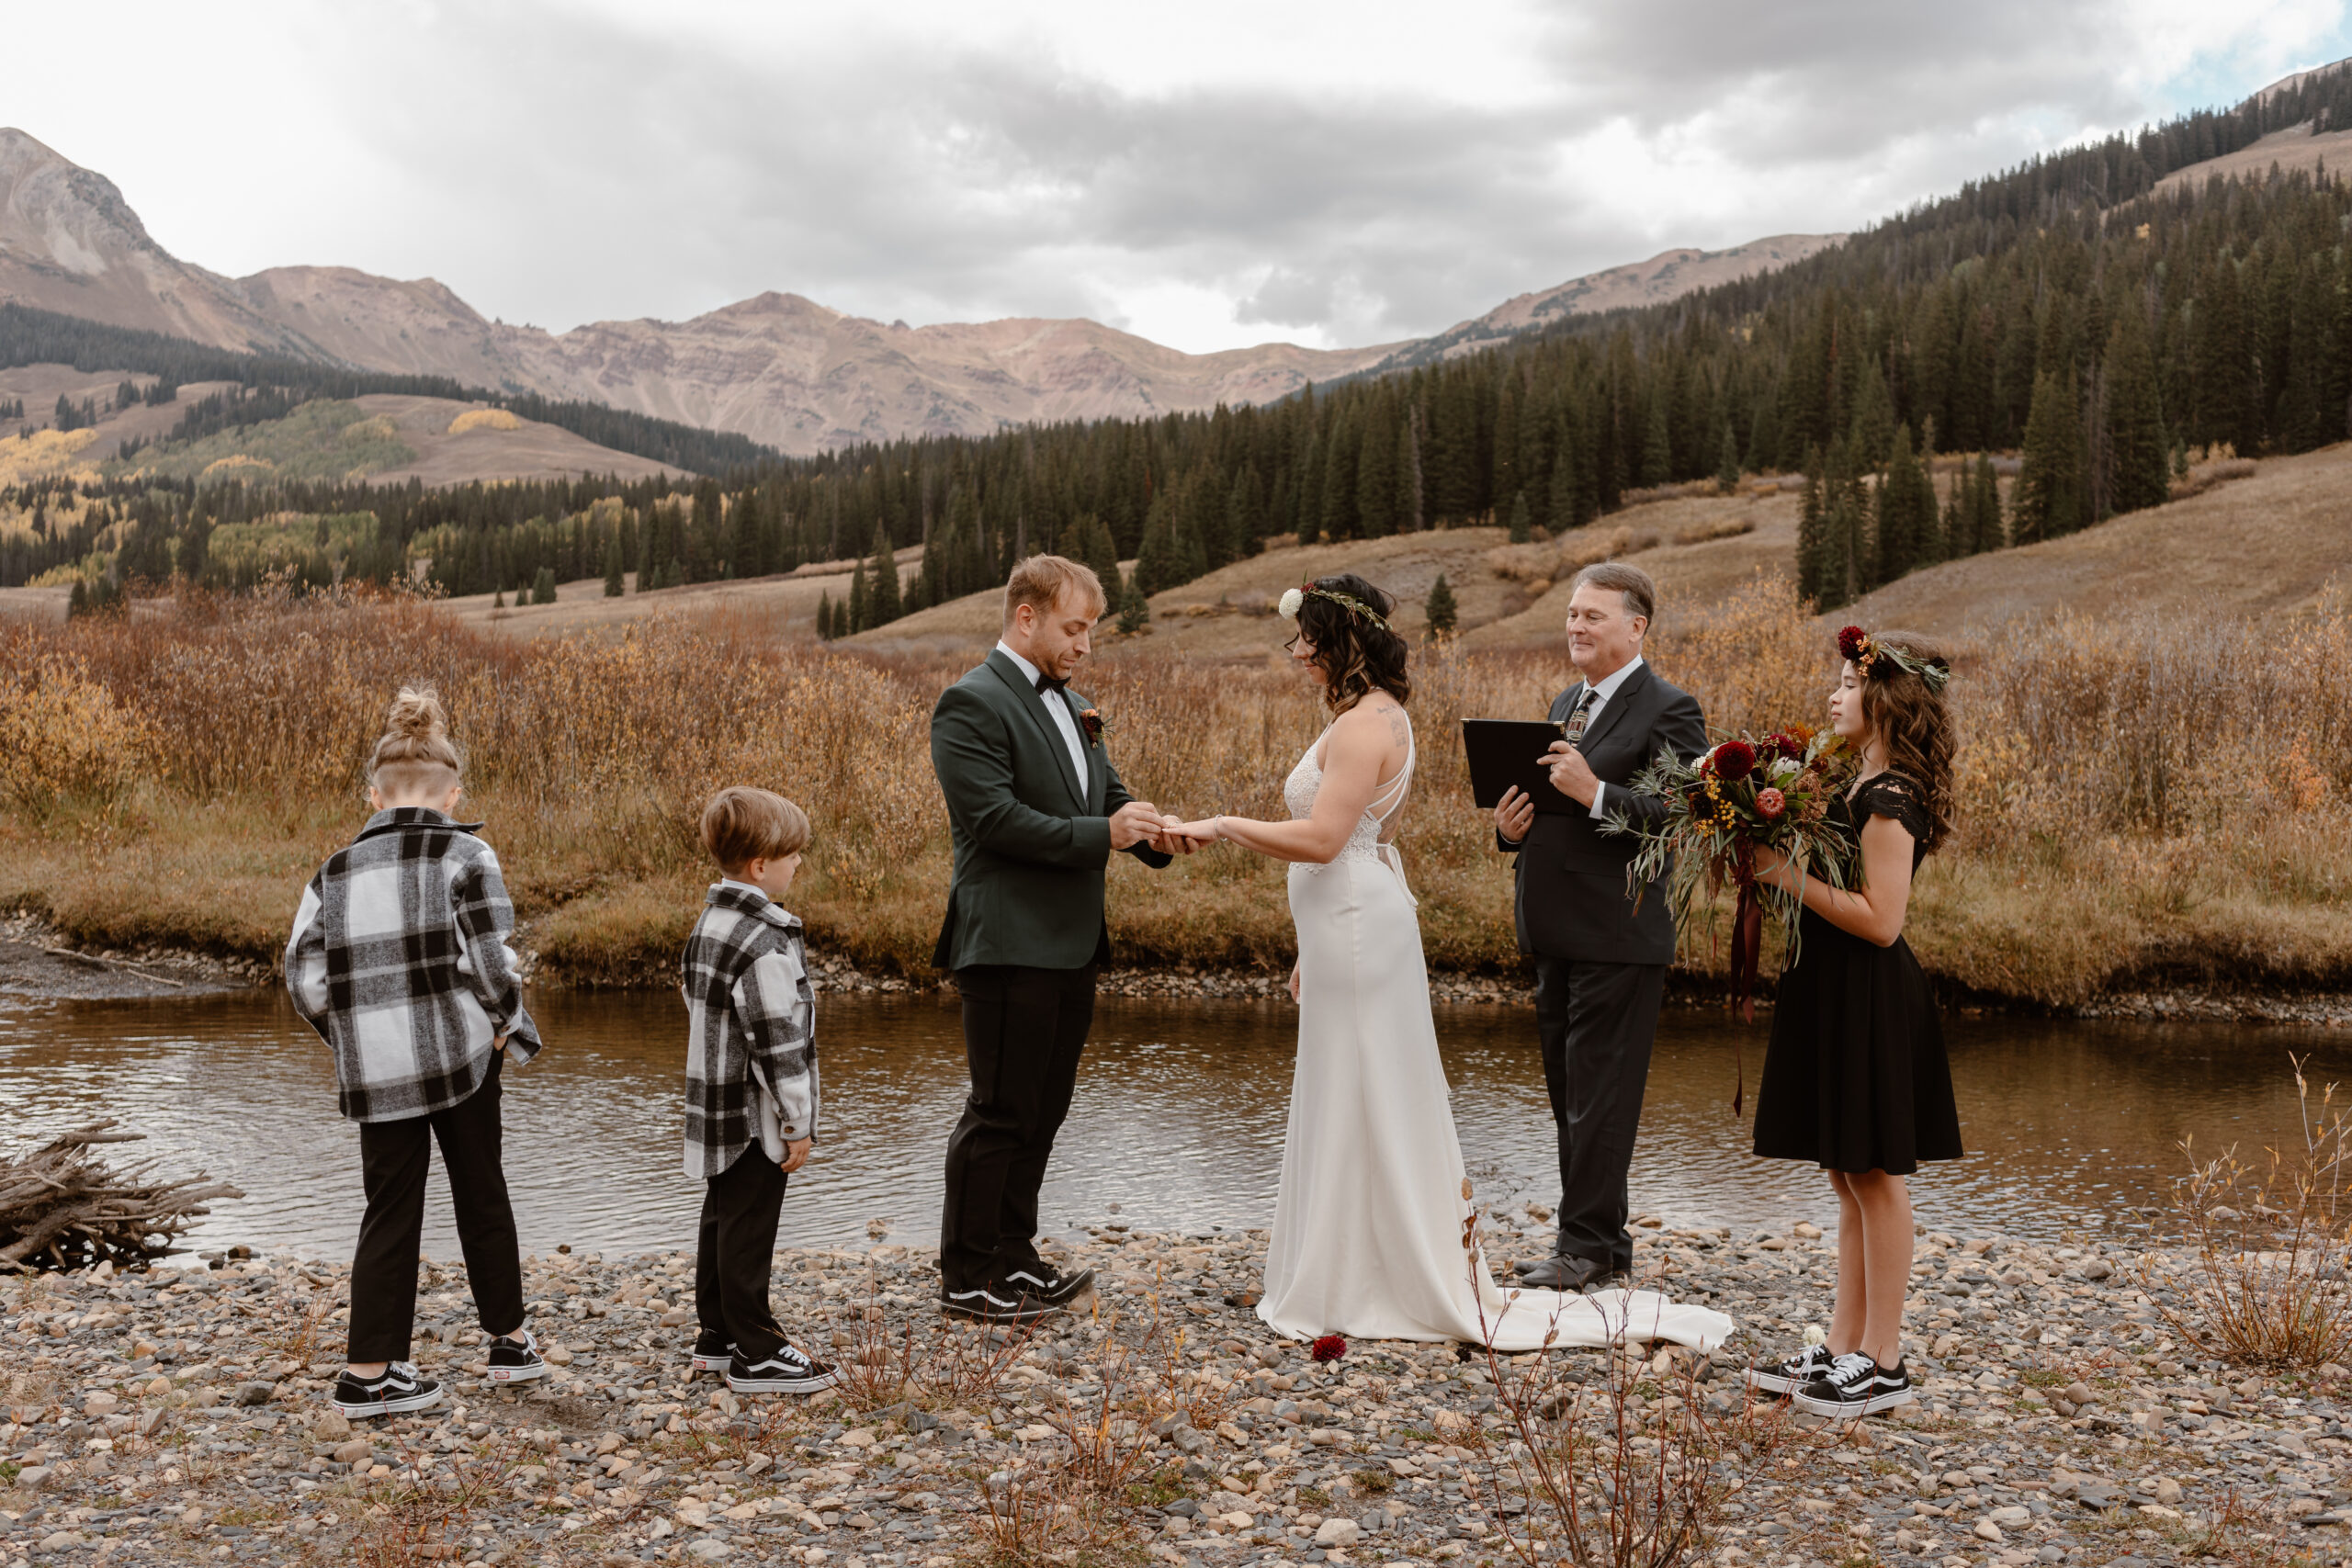 A bride, groom, and their blended family all take part in their elopement ceremony in Colorado.